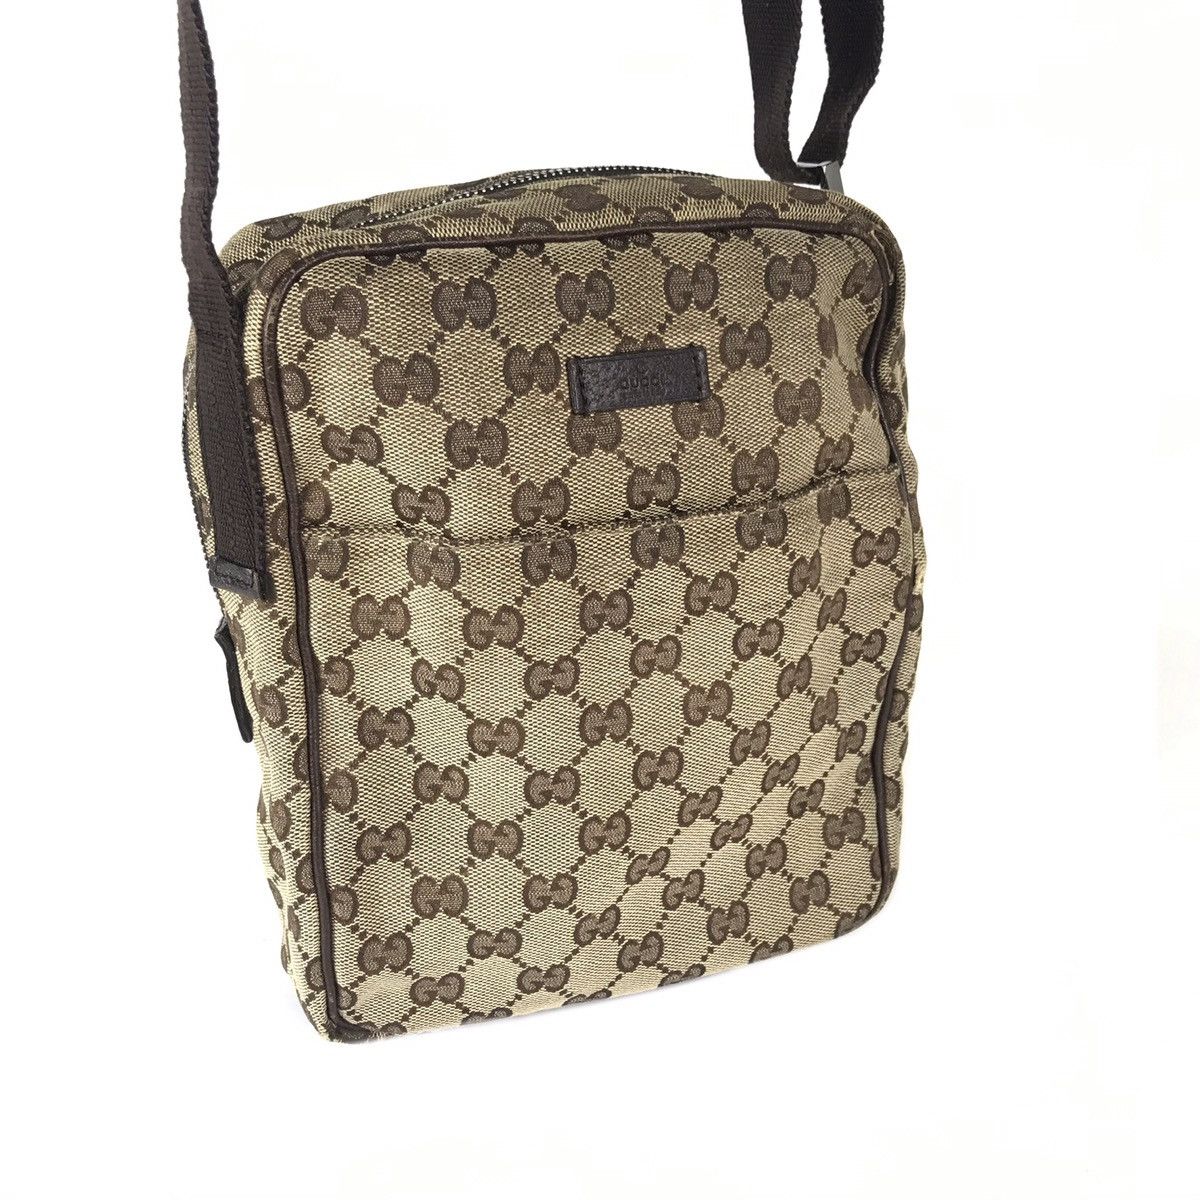 Gucci Monogram Crossbody Bag Size ONE SIZE - 2 Preview